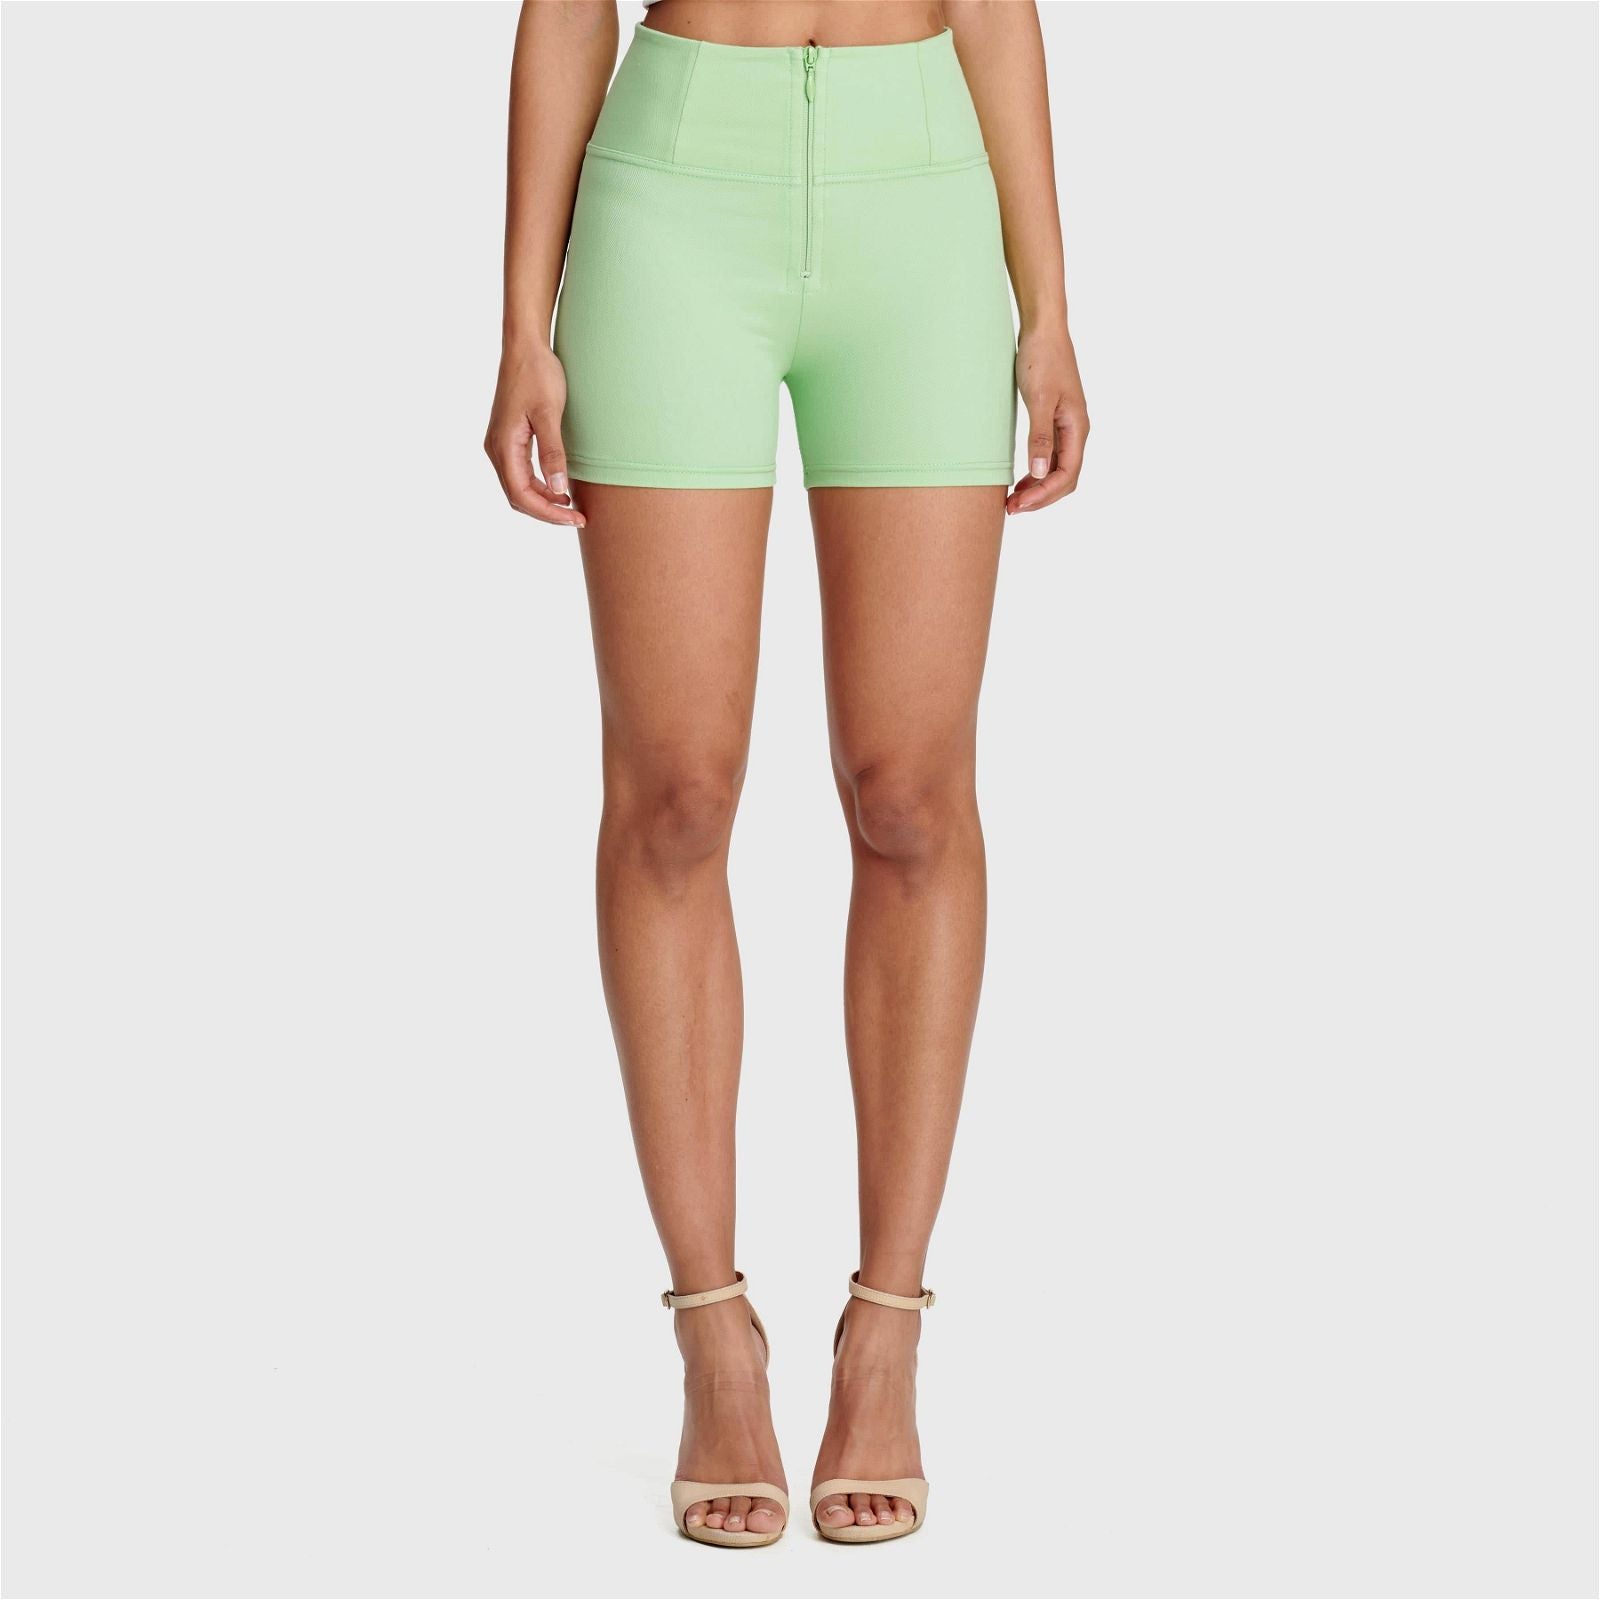 WR.UP® Fashion - High Waisted - Shorts - Pastel Green 2